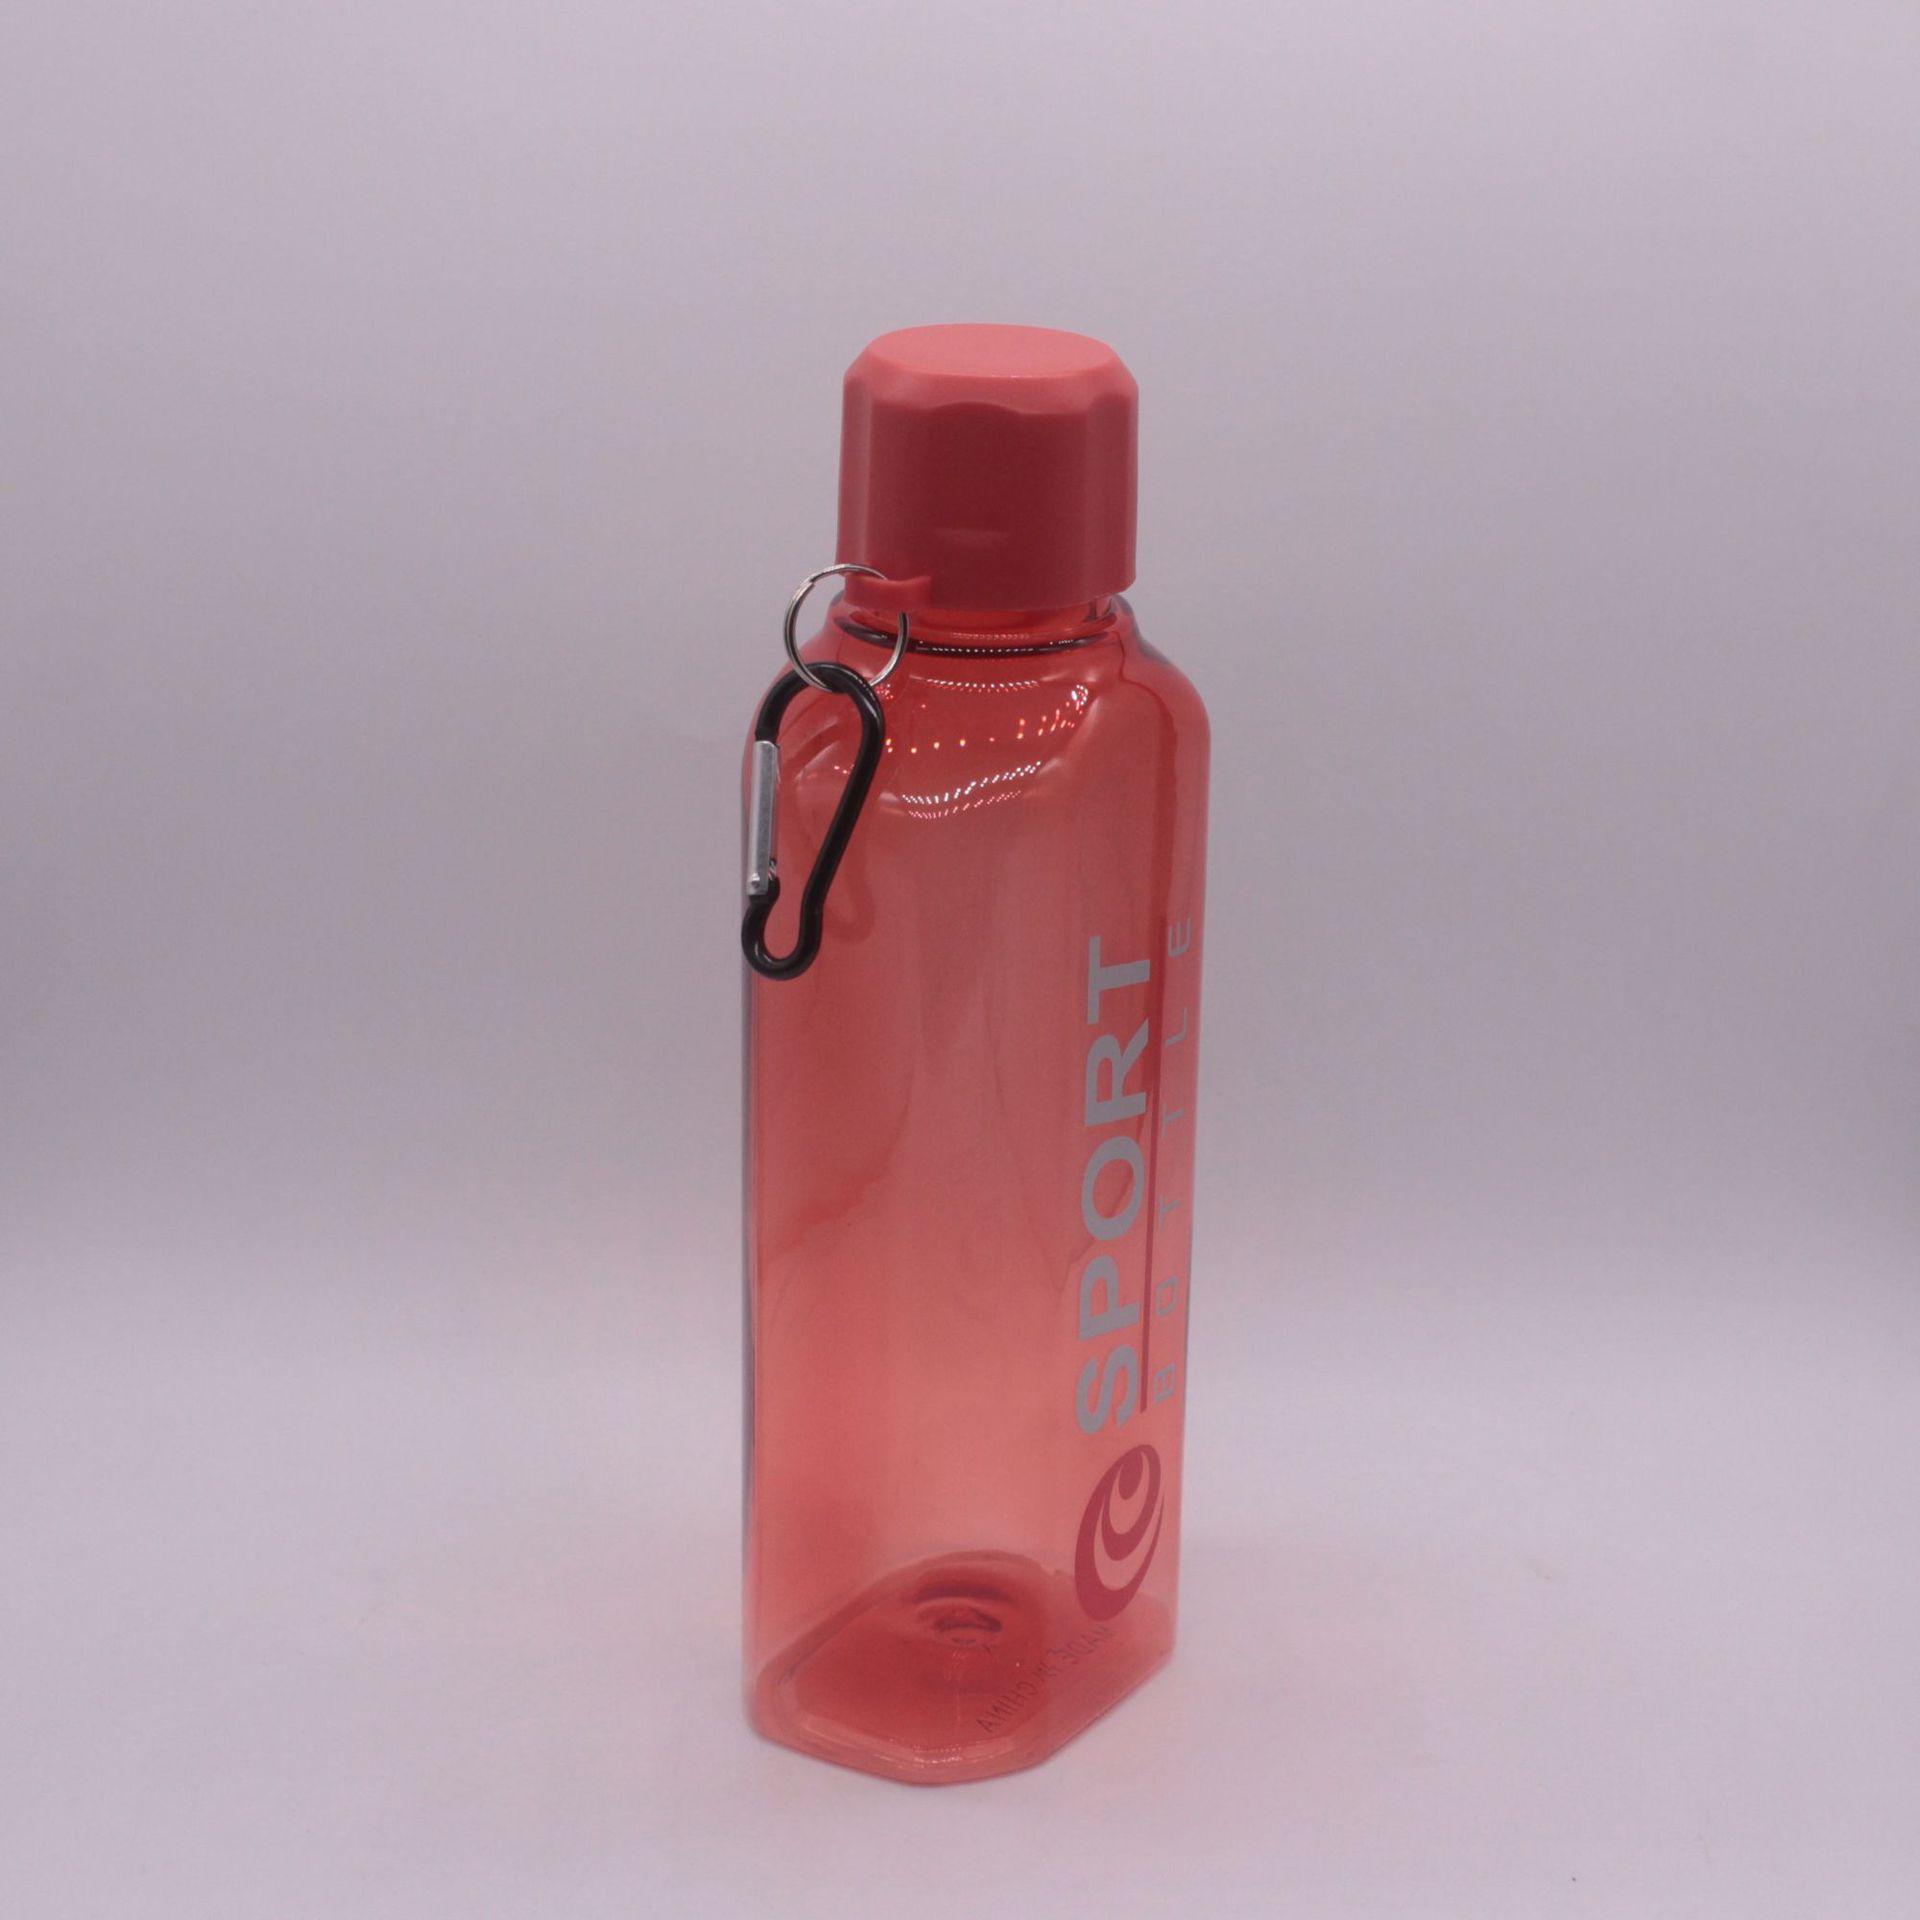 Msmk Flat Water Cup 800ml Square Water Cup Plastic Outdoor Carry-on Cup Student Adult Tea Drinking Cup Sports Bottle